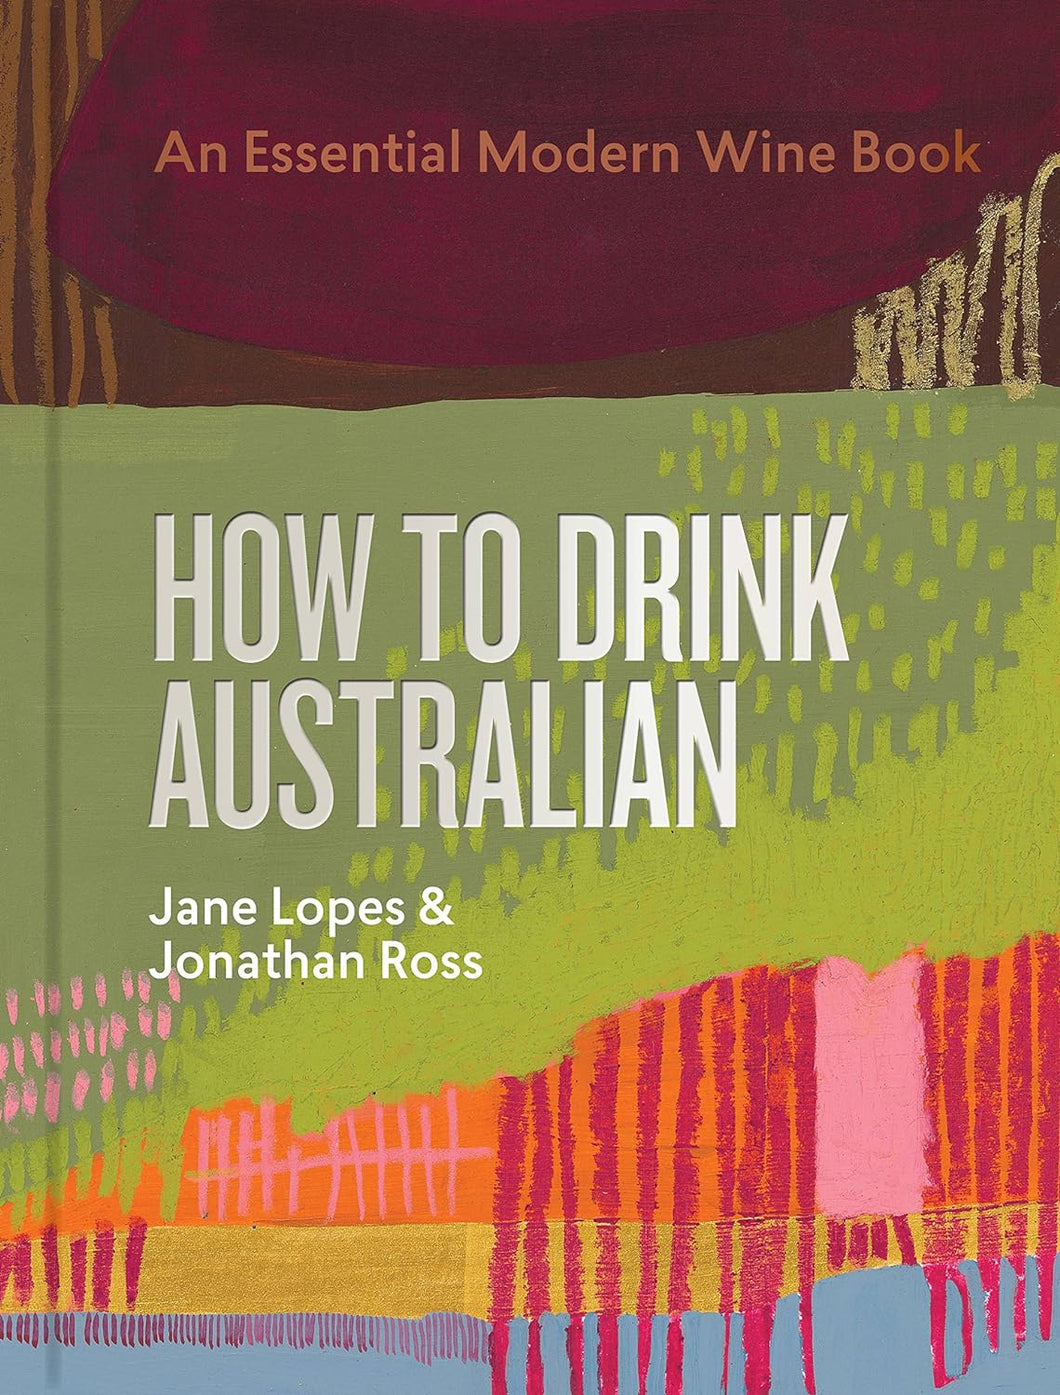 How to Drink Australian: An Essential Modern Wine Book by Jane Lopes and Jonathan Ross